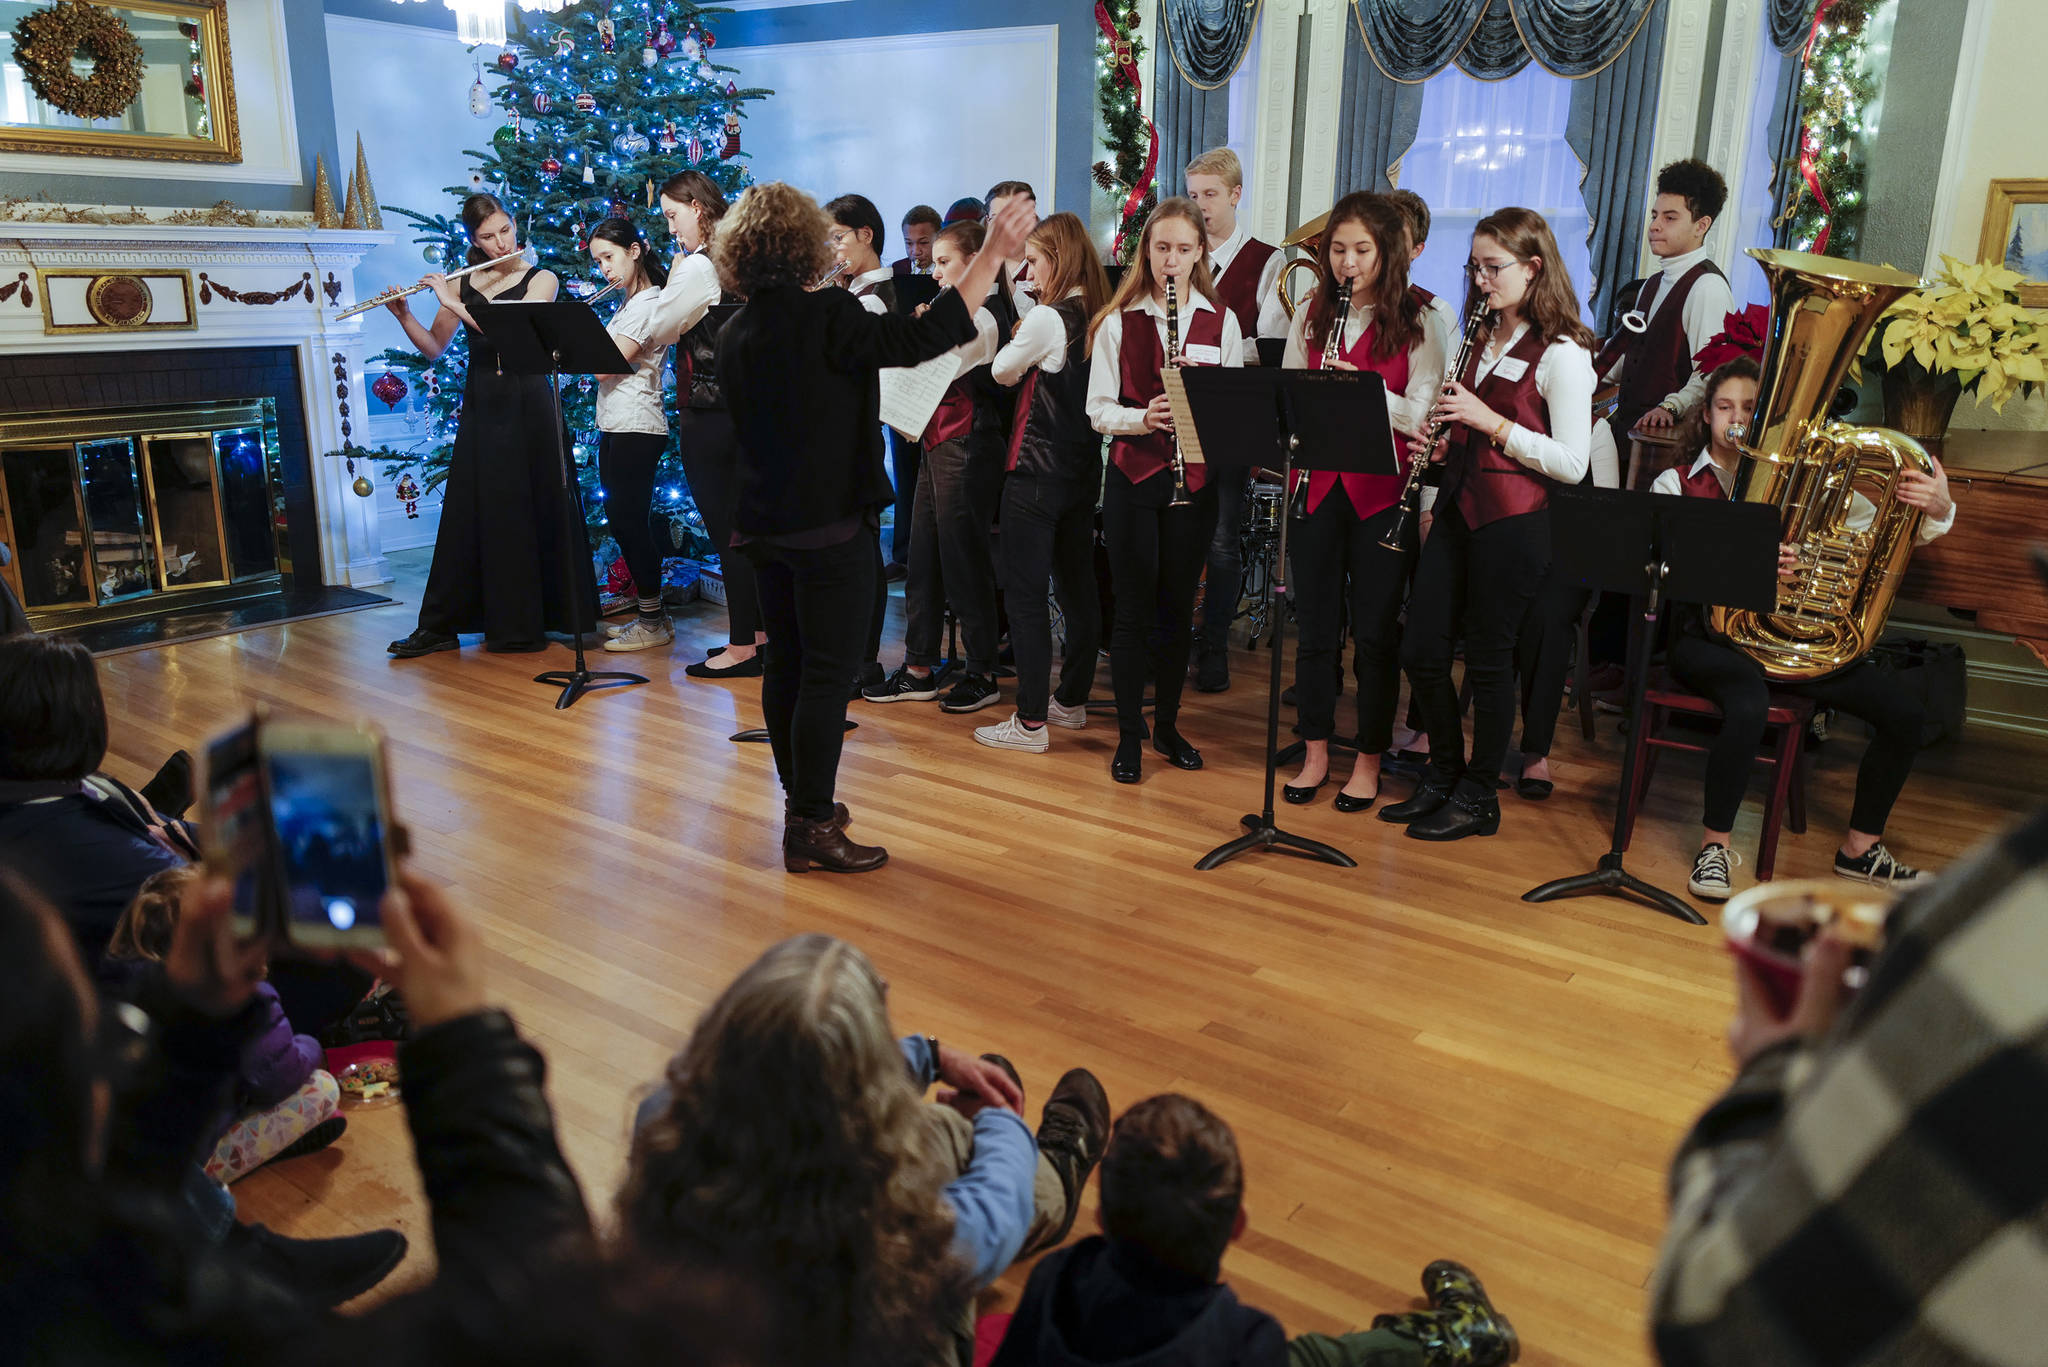 Members of the Juneau-Douglas High School: Yadaa.at Kalé orchestra perform at the Governor’s Open House on Tuesday, Dec. 10, 2019. (Michael Penn | Juneau Empire)